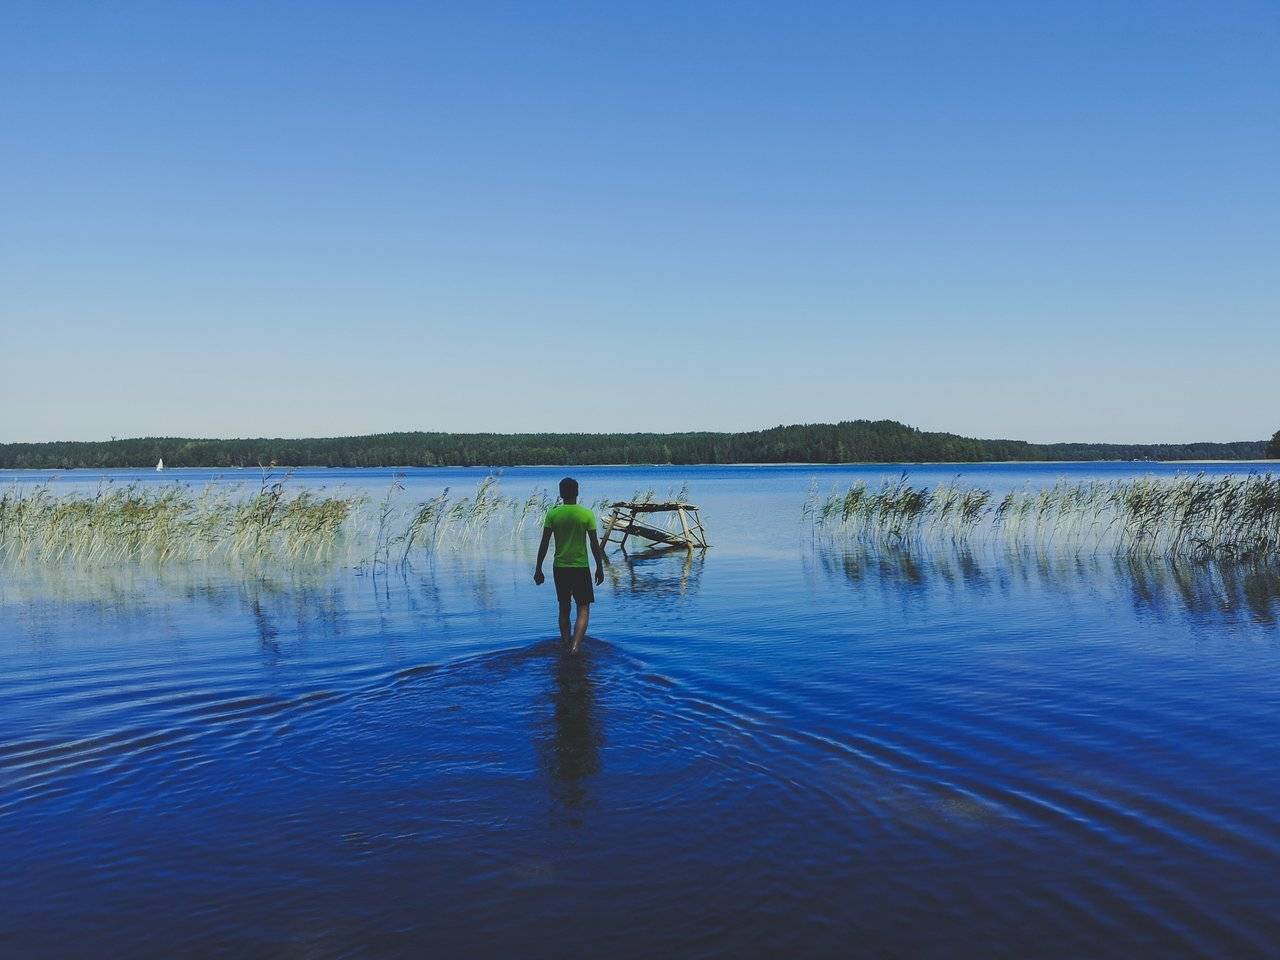   Wading on White Lakajai Lake in Labanoras Regional Park, Lithuania. Photo Alis Monte [CC BY-SA 4.0], via Connecting the Dots